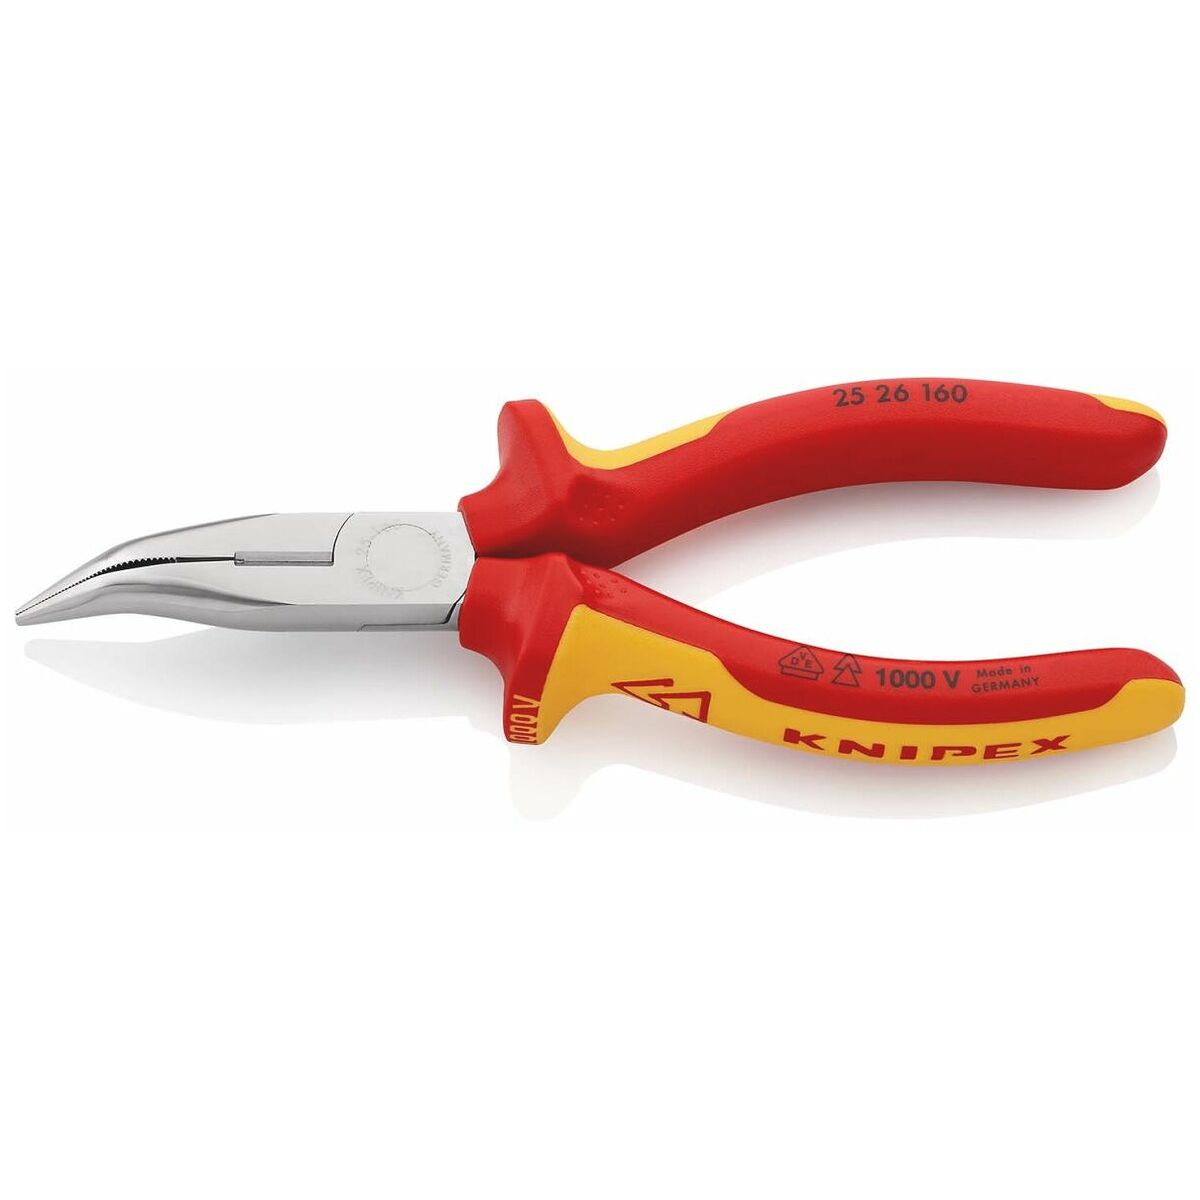 Snipe nose pliers, angled VDE insulated 160 mm